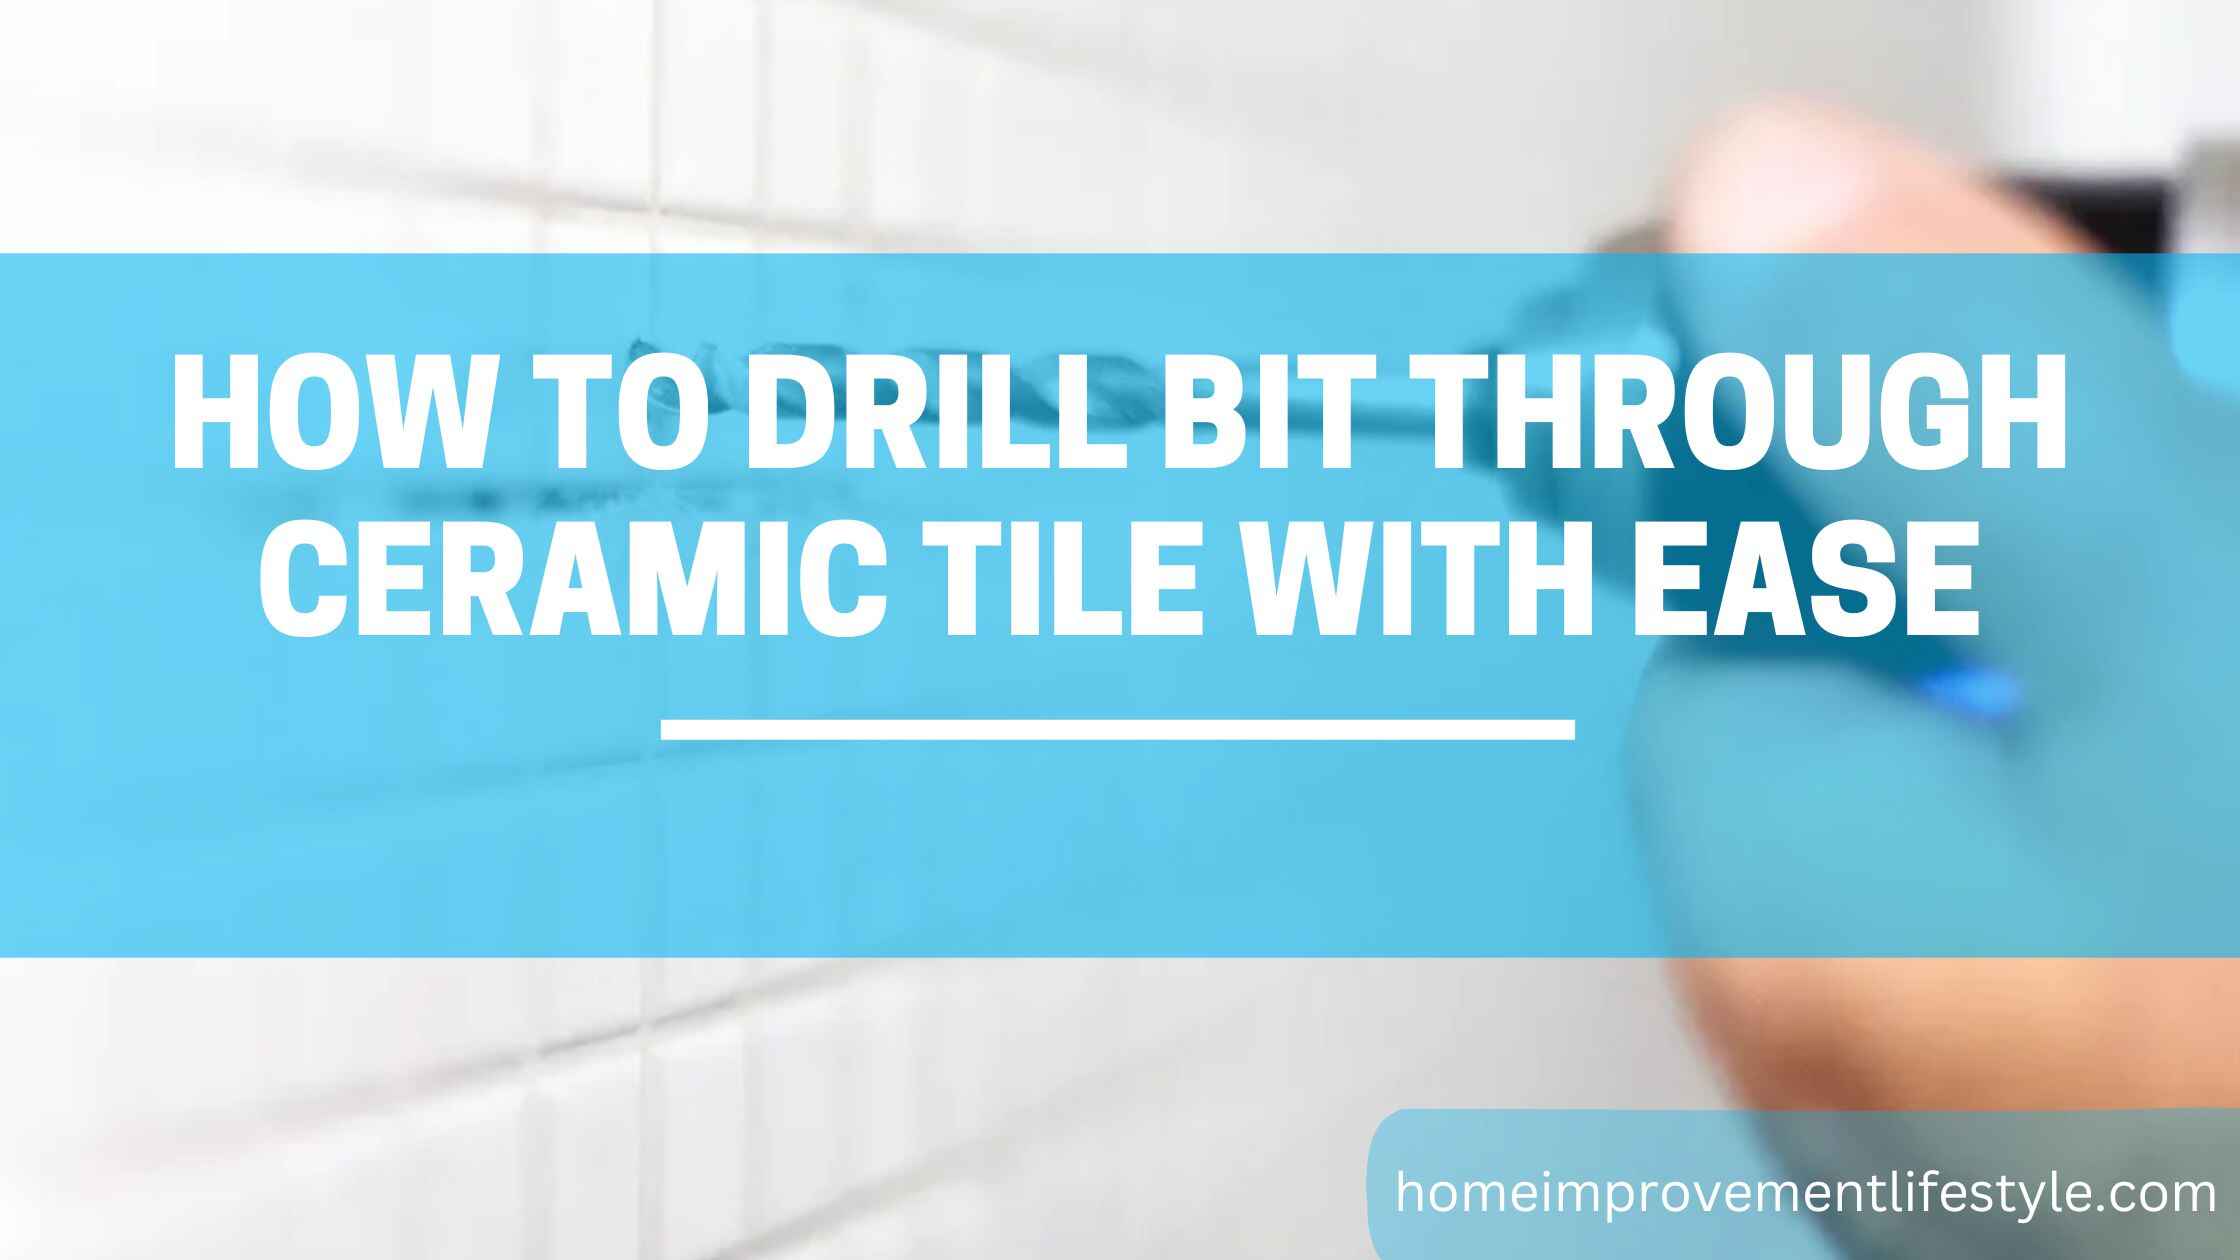 How To Drill bit Through Ceramic Tile With Ease